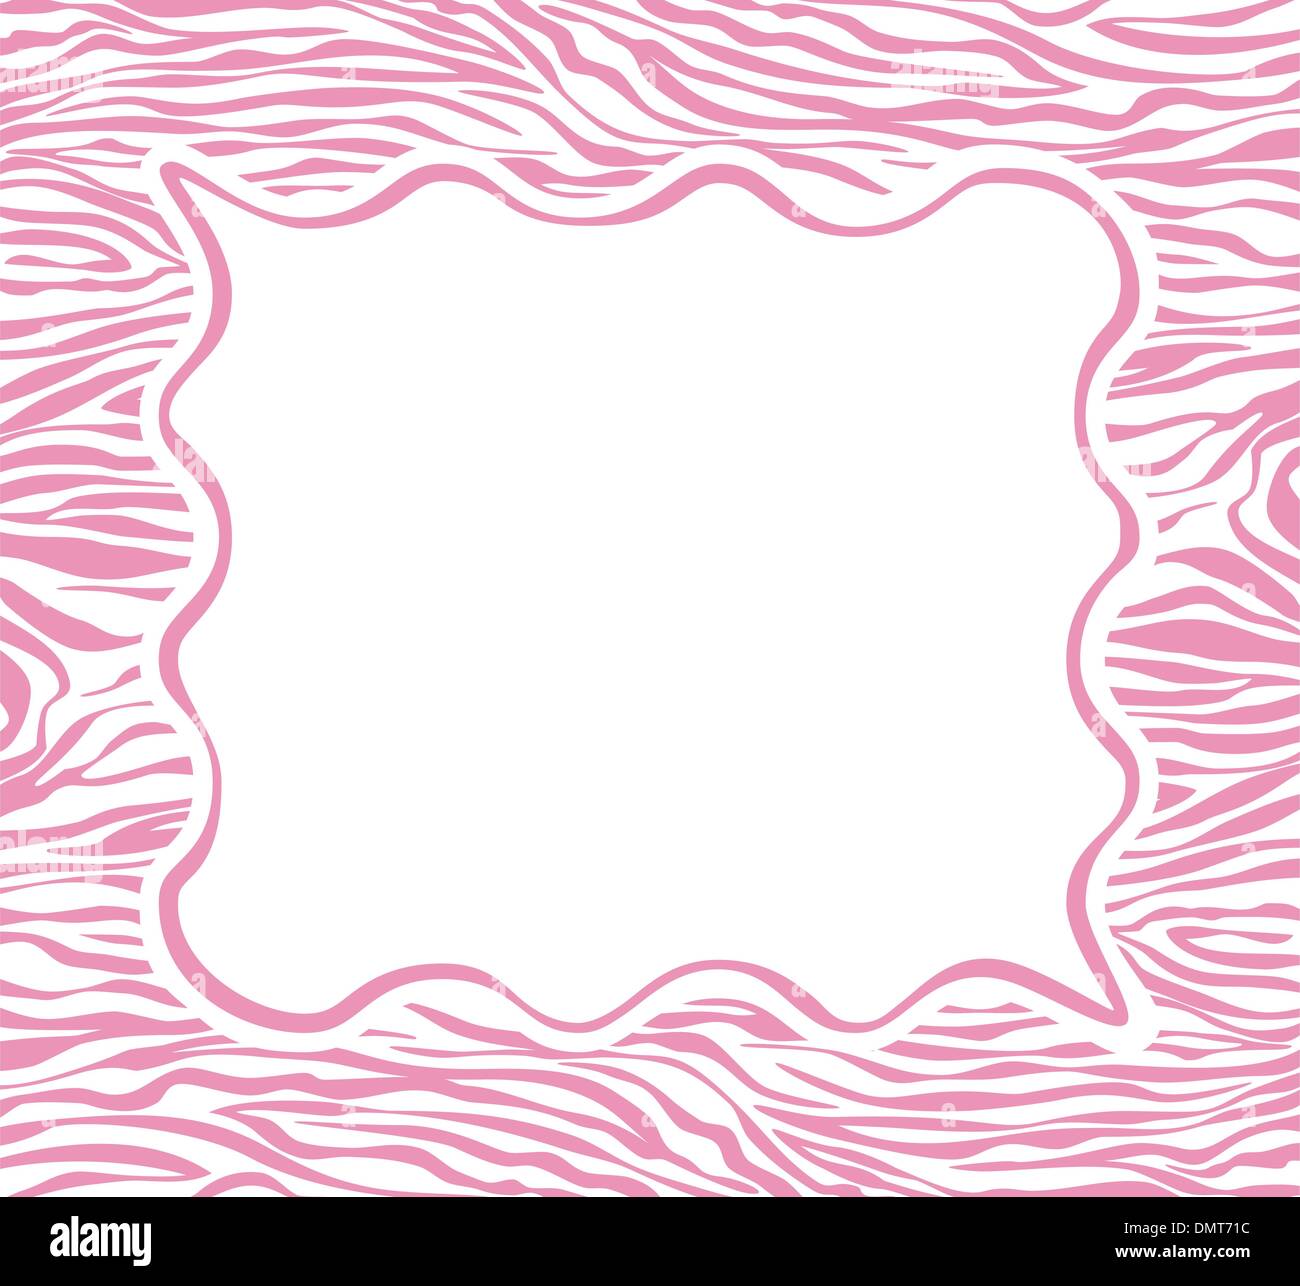 frame with abstract zebra skin texture Stock Vector